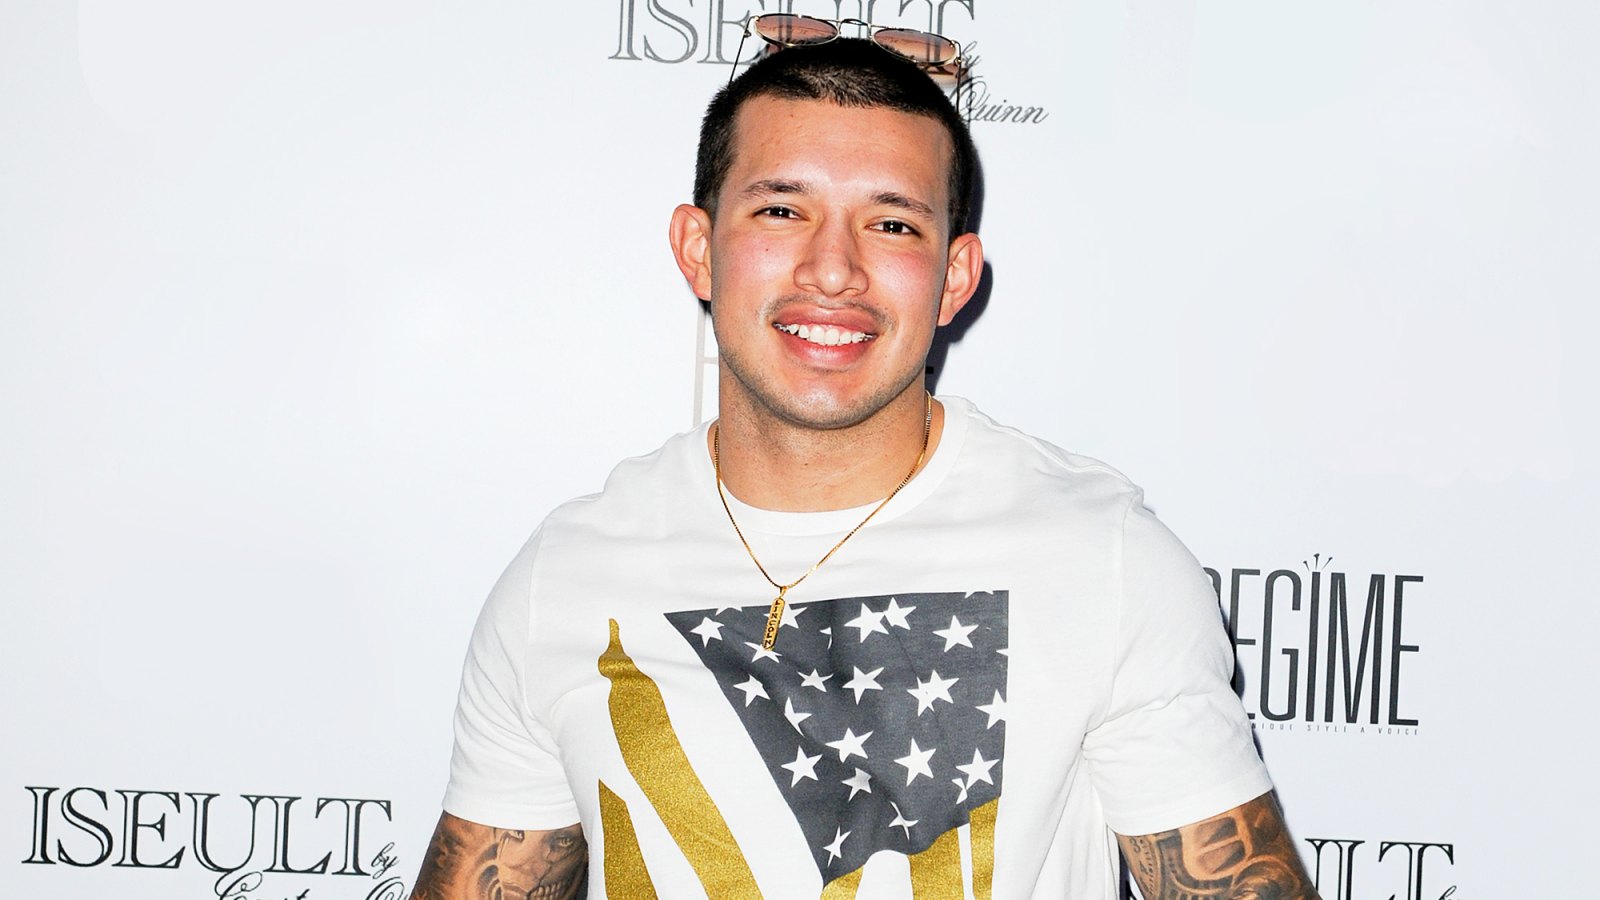 Javi Marroquin attends the designer Courtney Quinn Launches New Couture 2017 Lingerie Line hosted By Eva Marcille at Regime Enterprises in Miami, Florida.